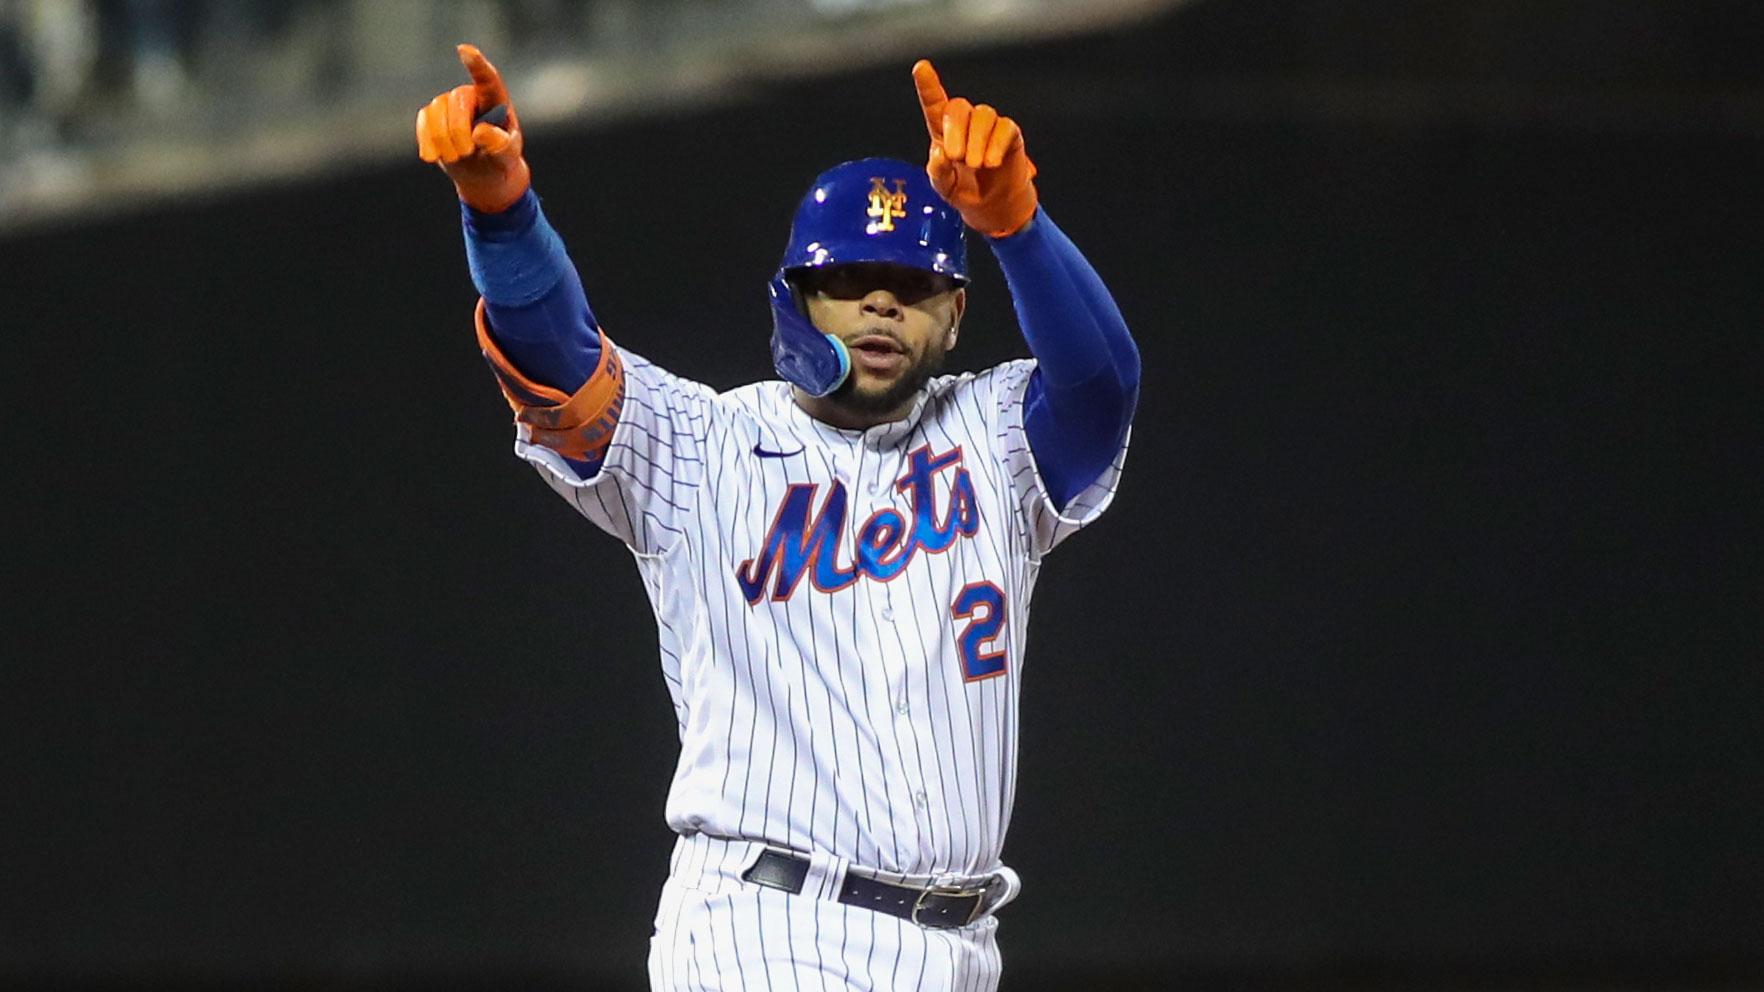 May 1, 2022; New York City, New York, USA; New York Mets first baseman Dominic Smith (2) points to the dugout after hitting an RBI double in the fourth inning against the Philadelphia Phillies at Citi Field. Mandatory Credit: Wendell Cruz-USA TODAY Sports / © Wendell Cruz-USA TODAY Sports